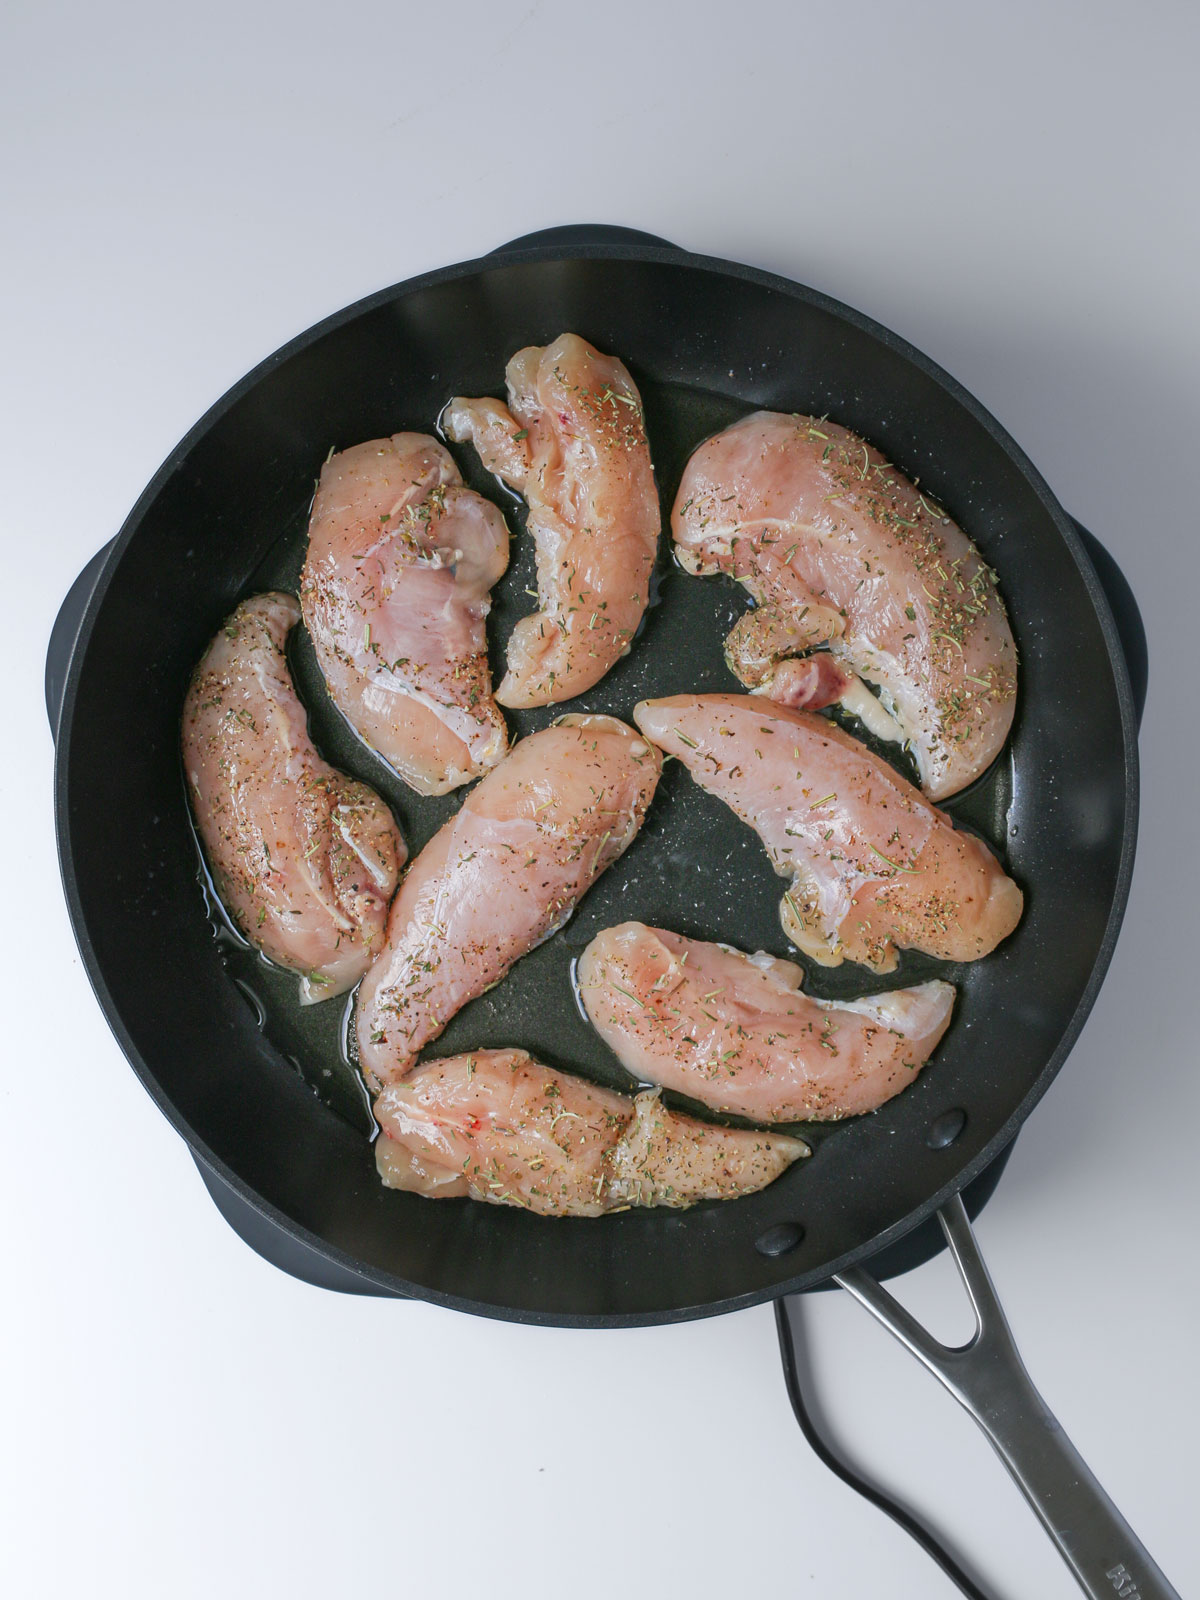 cooking chicken tenders in skillet of bacon fat.